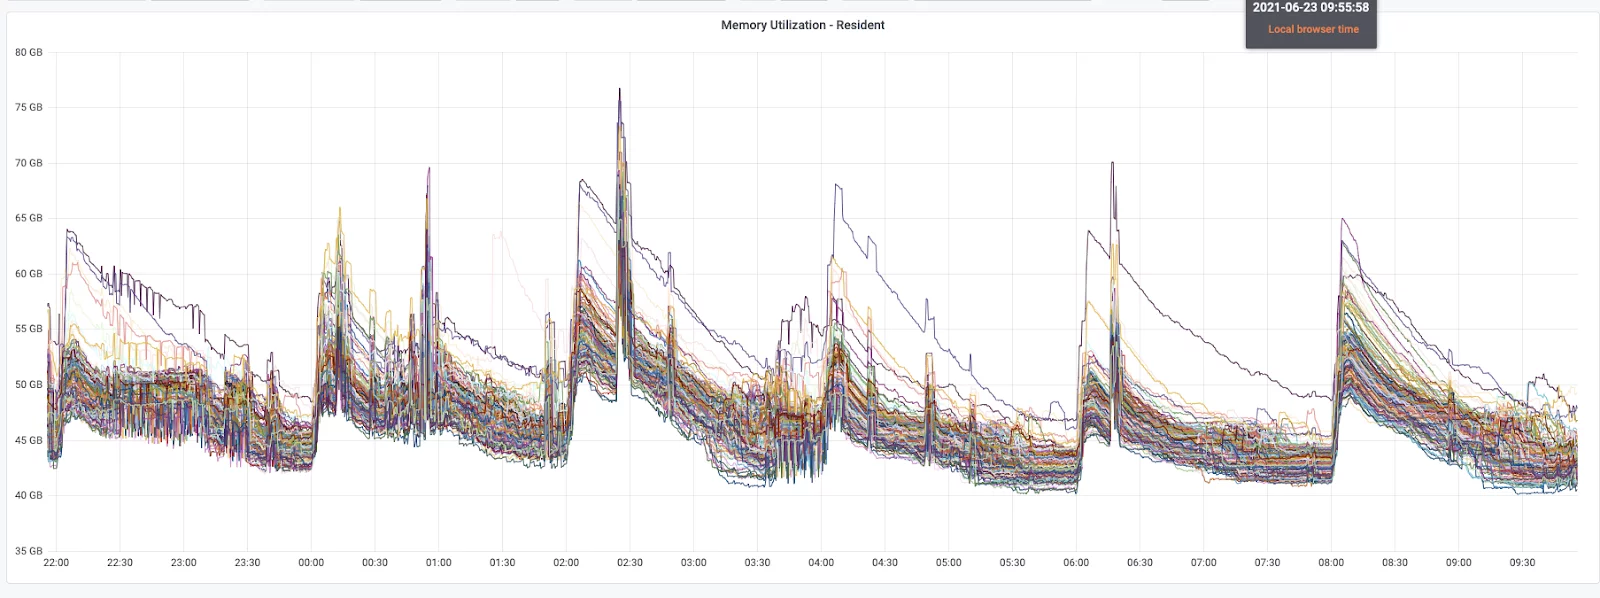 Memory usage for nodes in a cluster spikes up by 20-60% every 2 hours